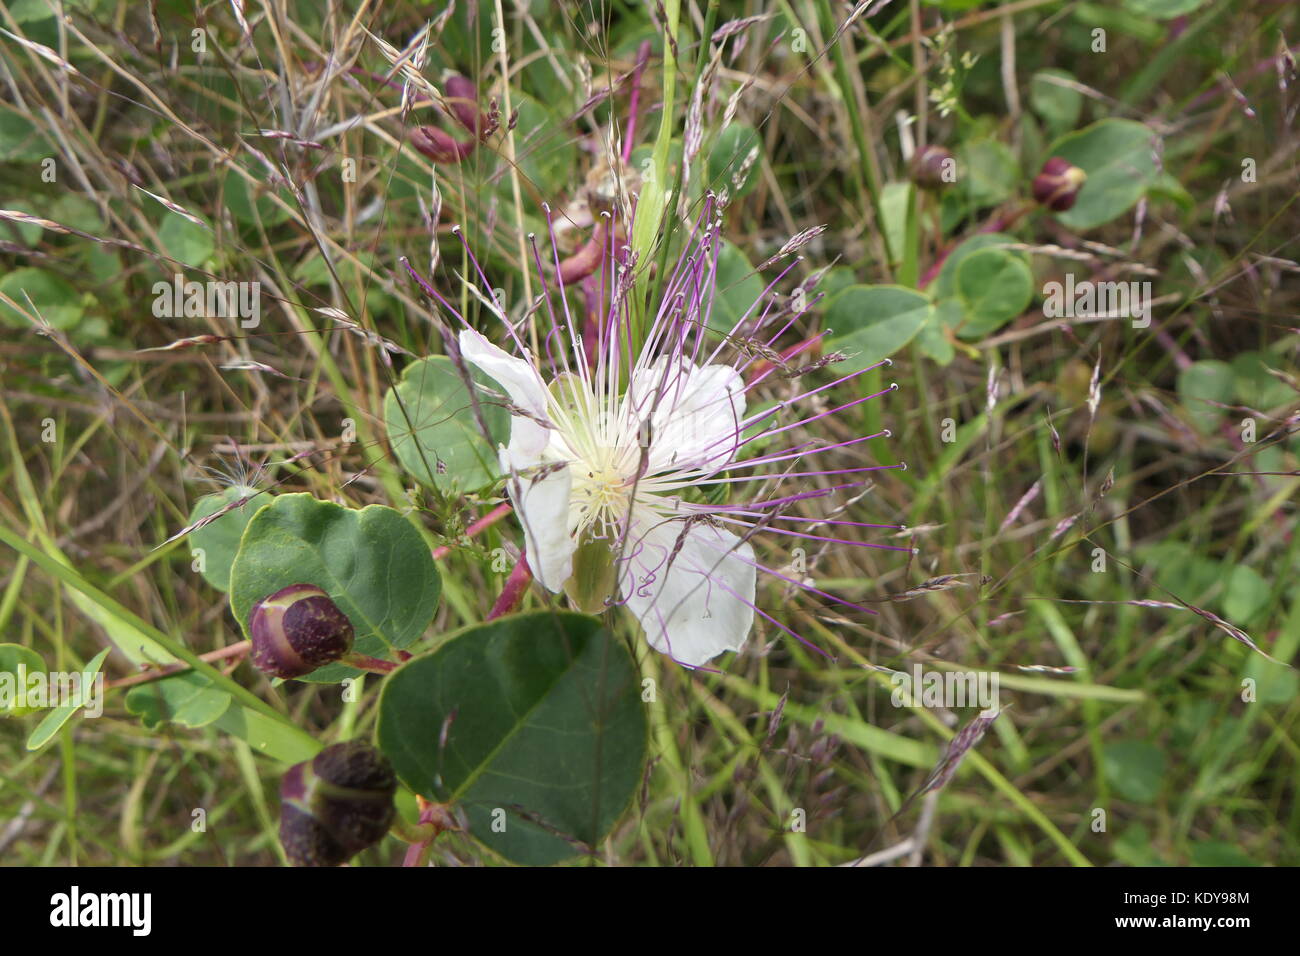 Caper capparis spinosa plant and flower Stock Photo